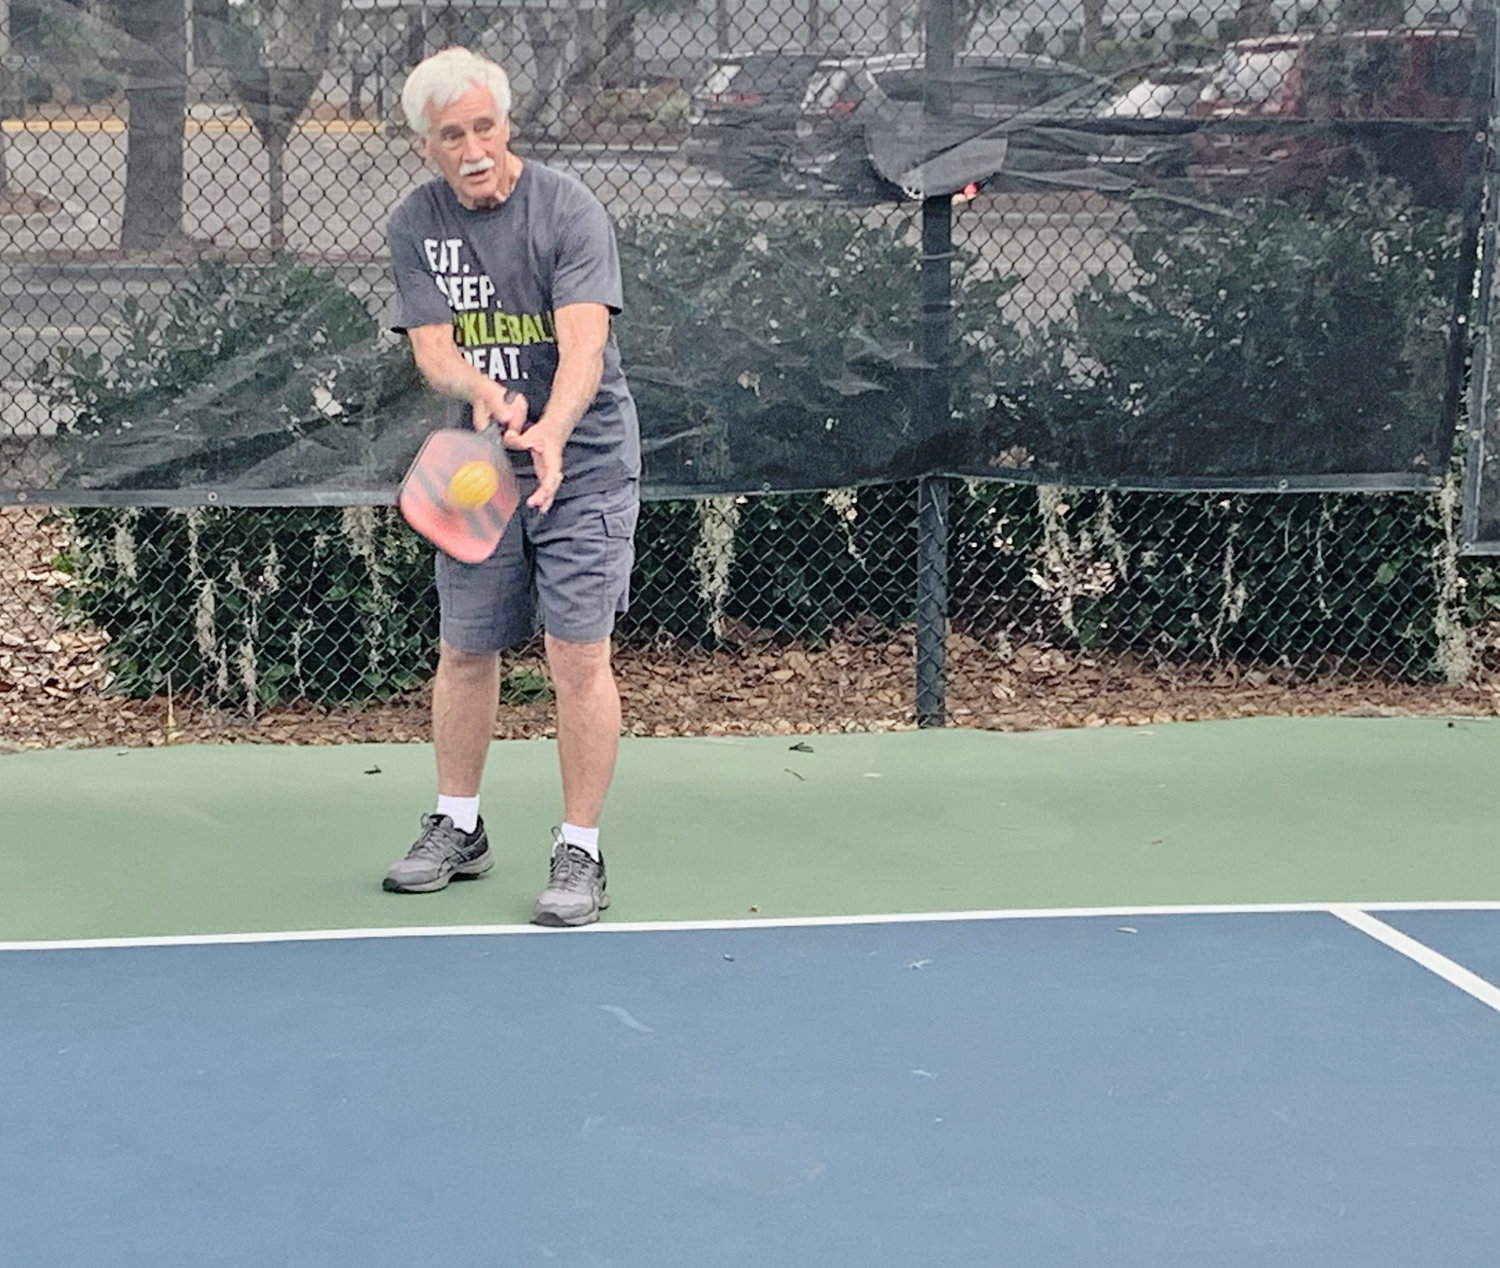 Grandmaster Clifford Crandall Jr. is ready to serve it up in the pickleball court.